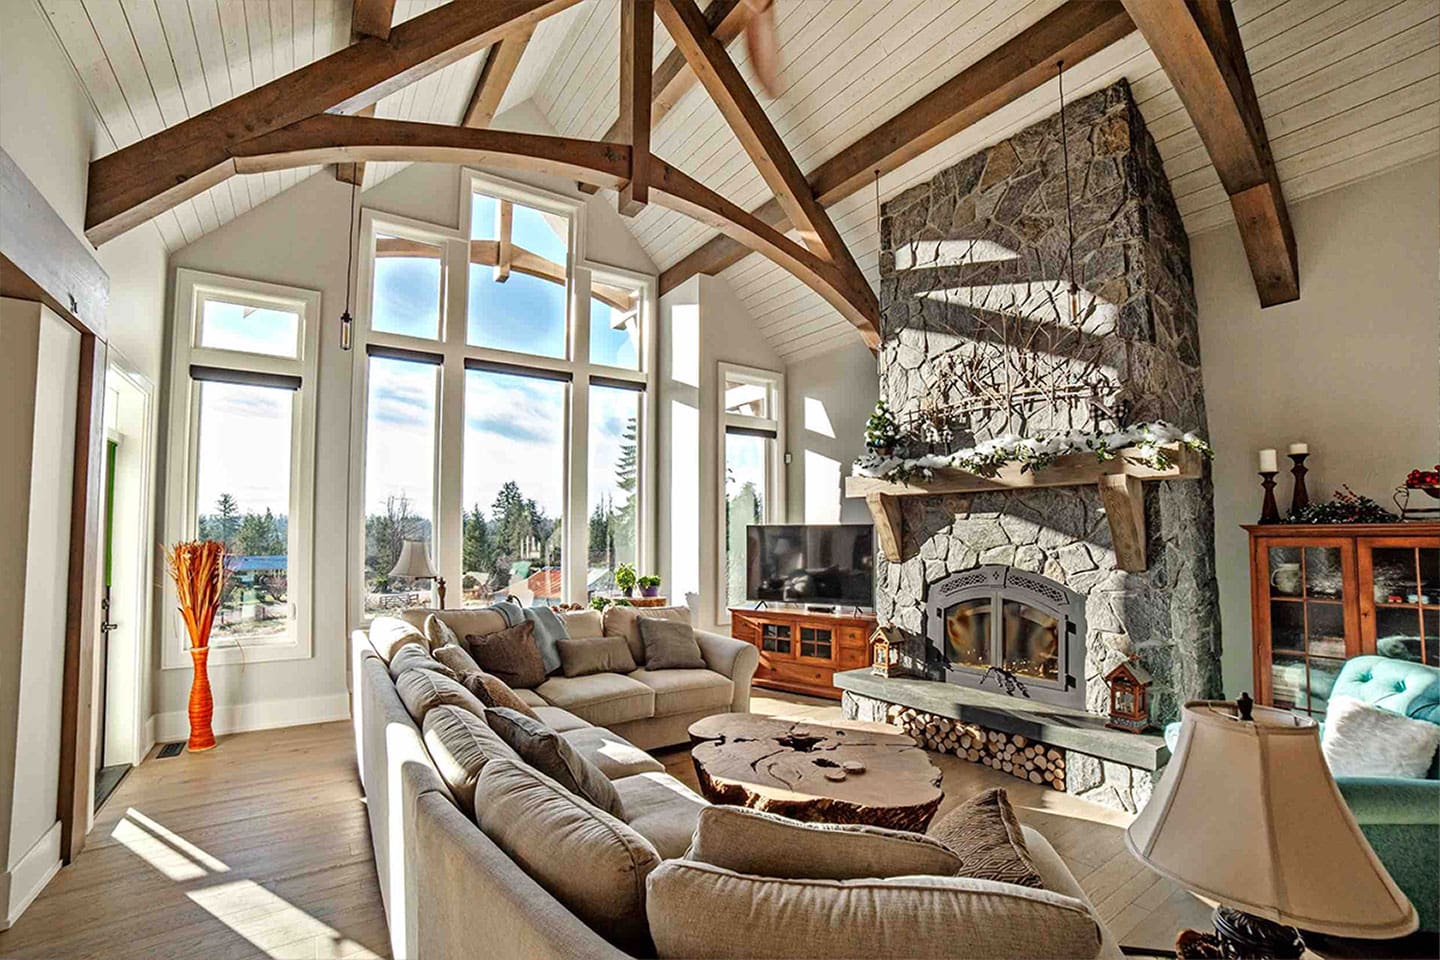 Living Area in Timber Frame Log Home.